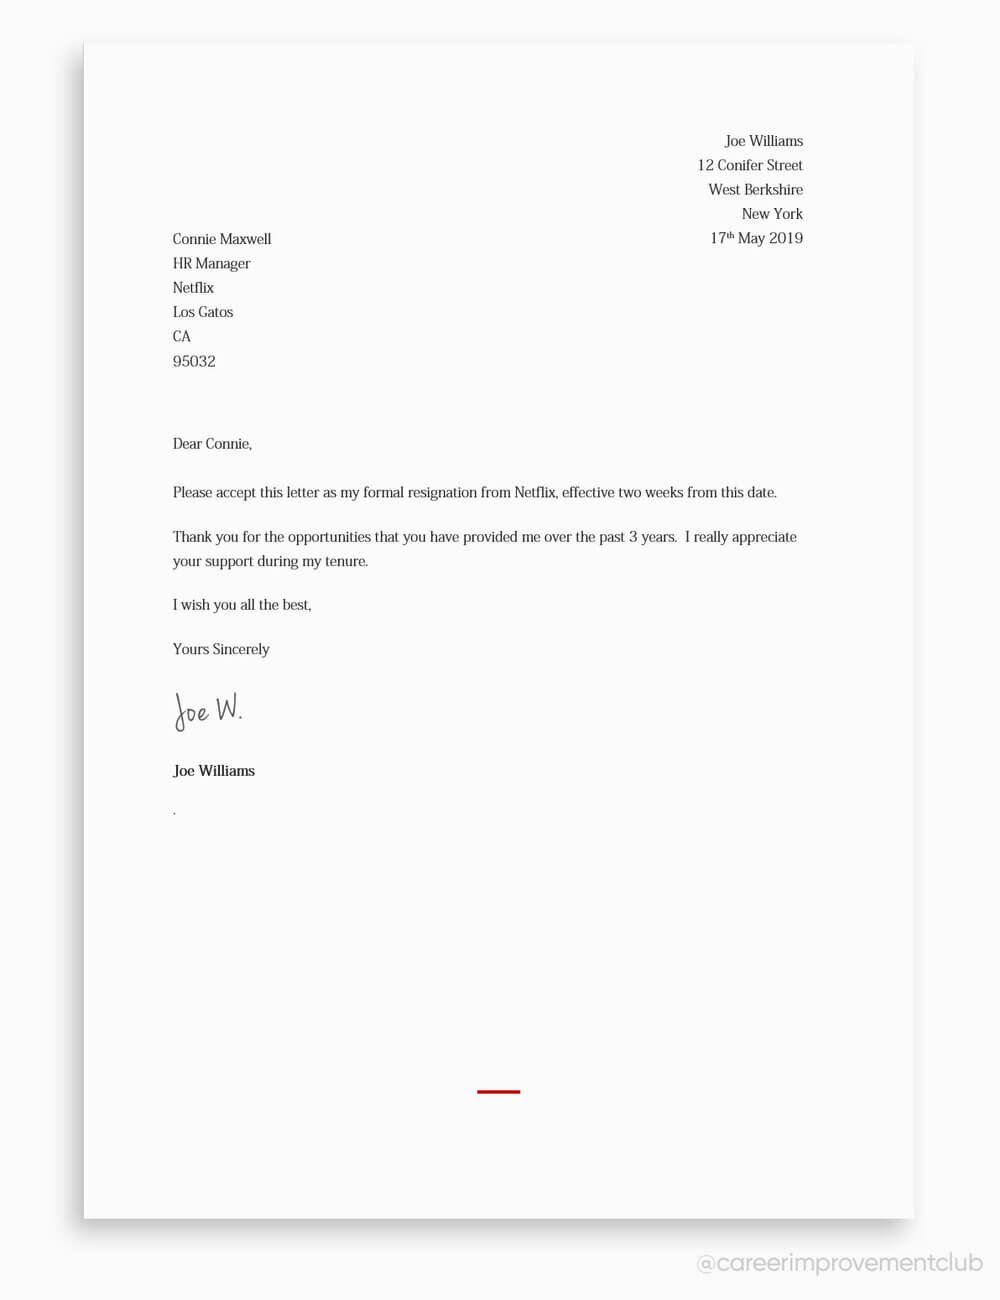 How To Write A Resignation Letter {With Examples}